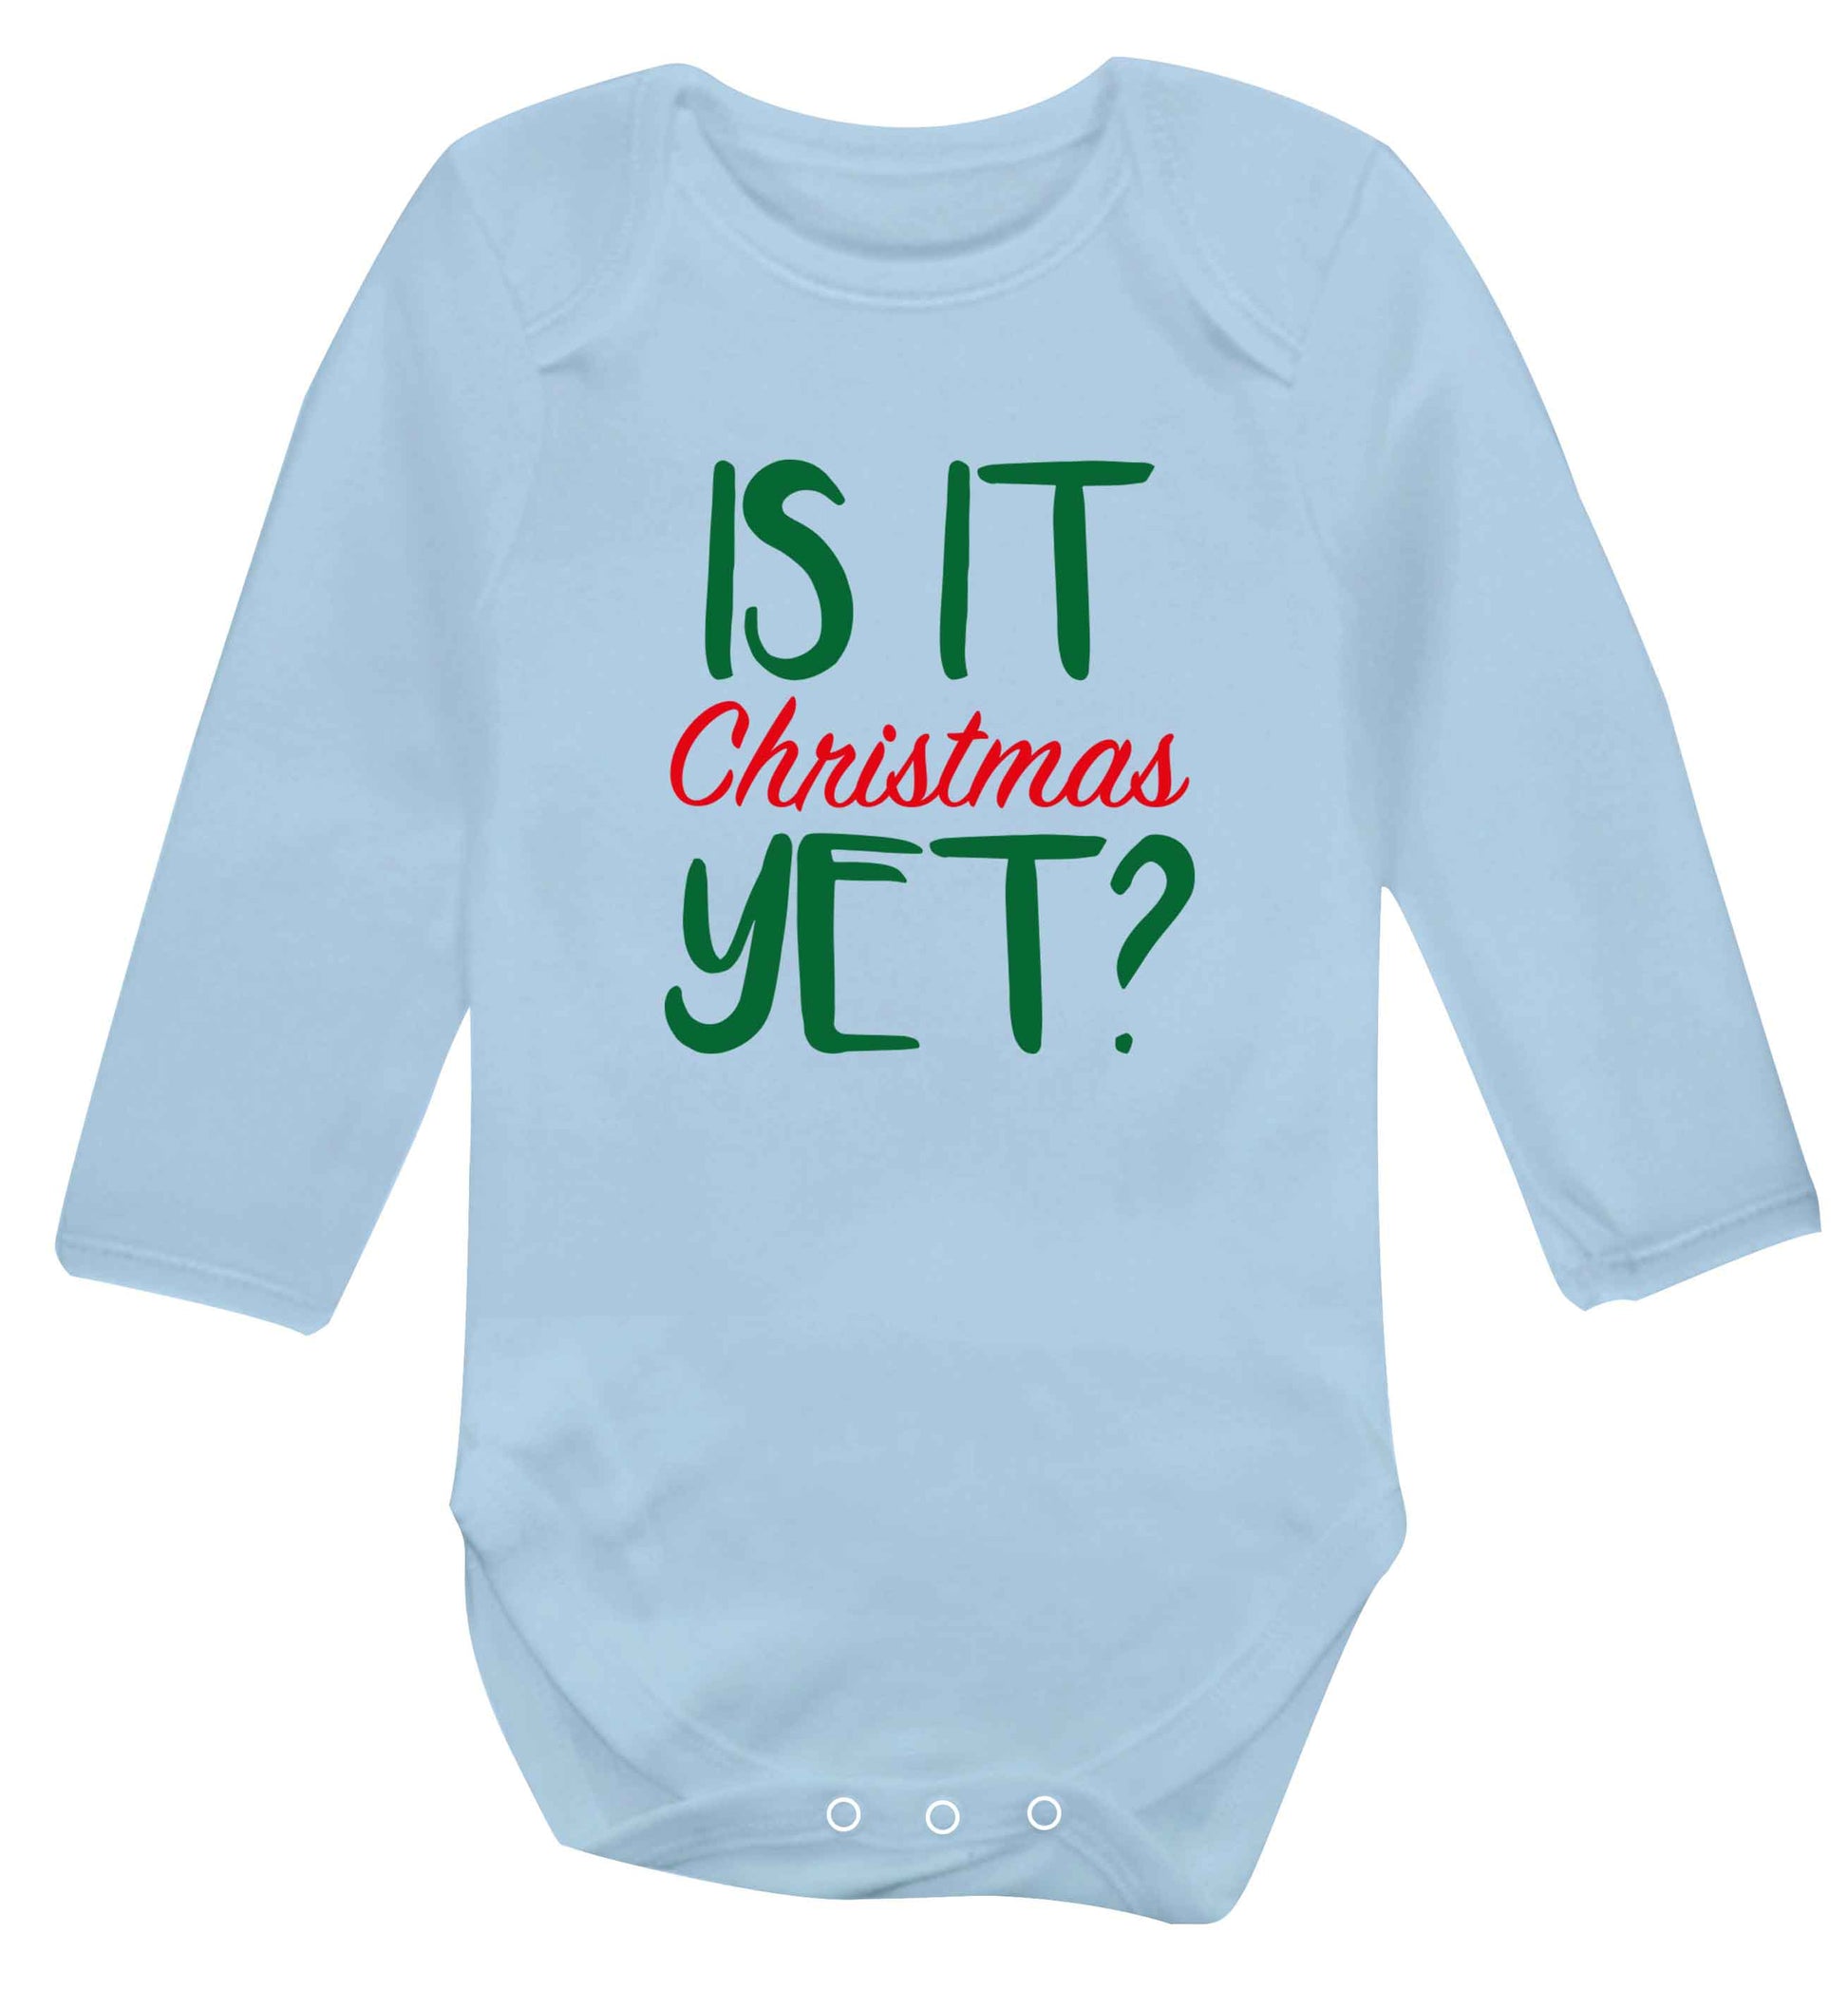 Is it Christmas yet? baby vest long sleeved pale blue 6-12 months